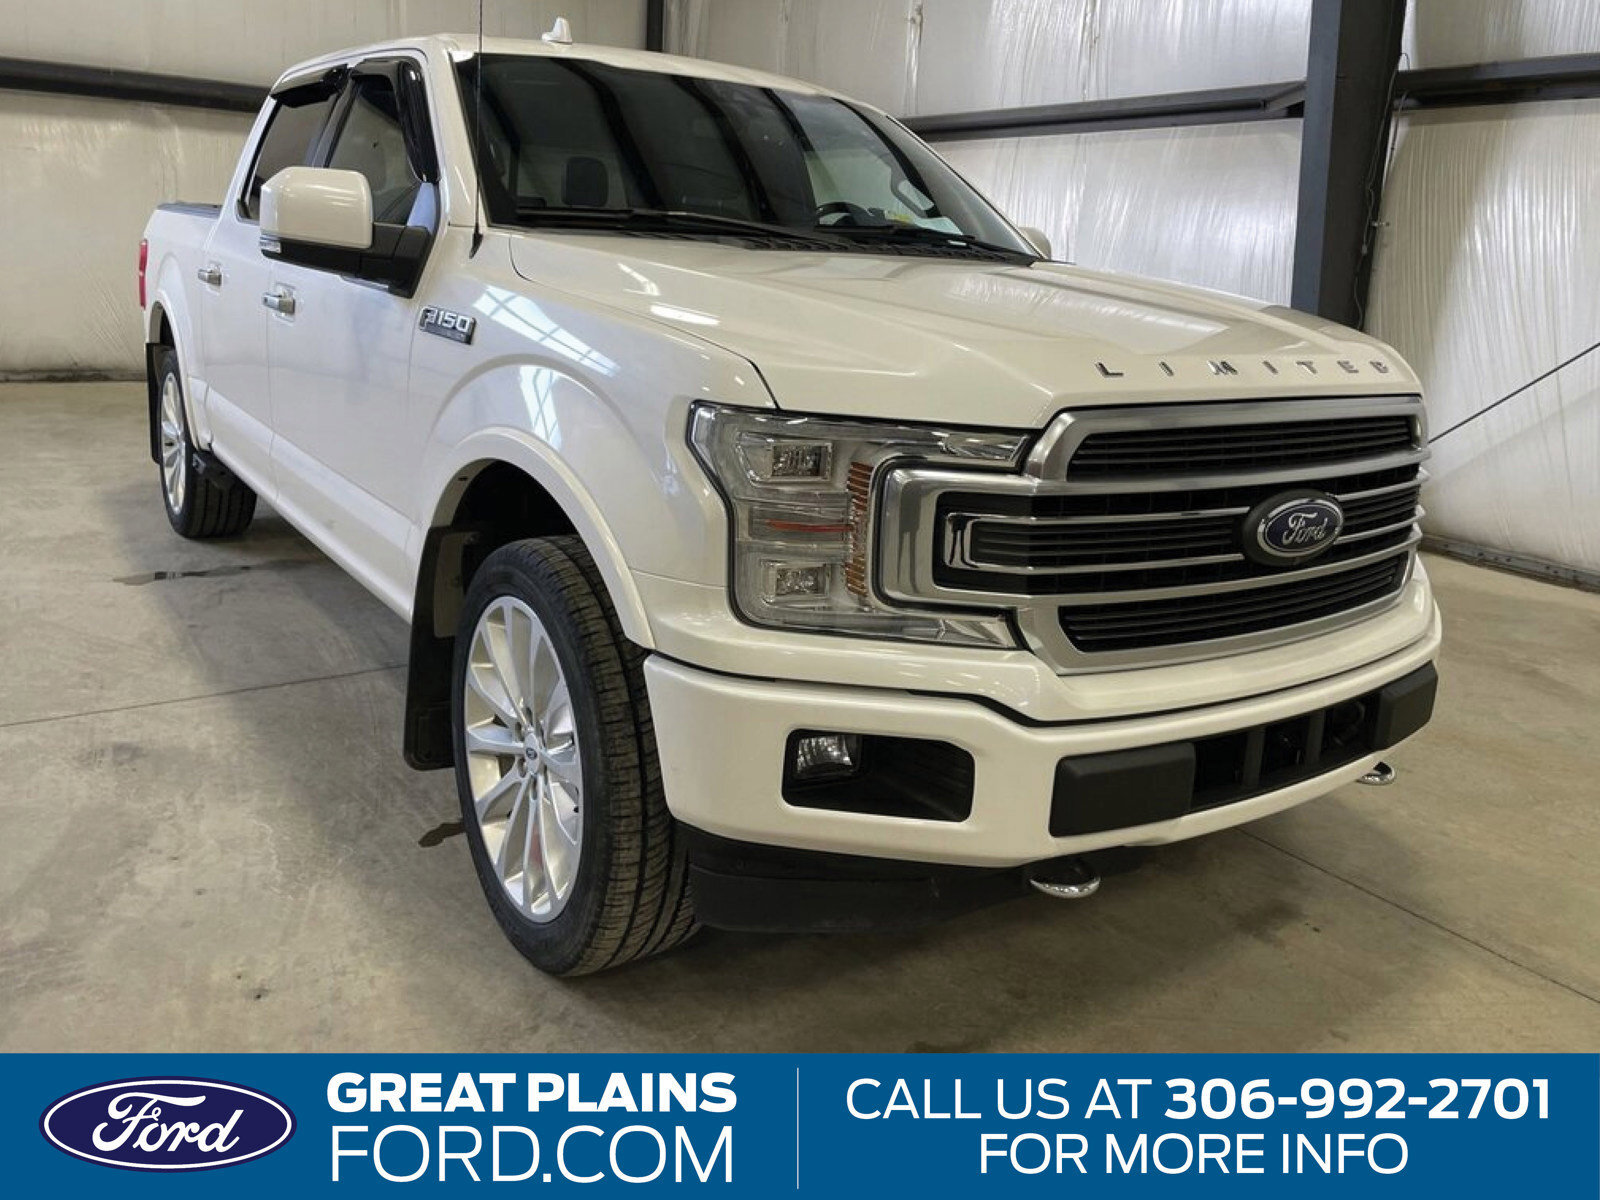 2018 Ford F-150 Limited | 4x4 |  Heated & Cooled Leather Seats | N